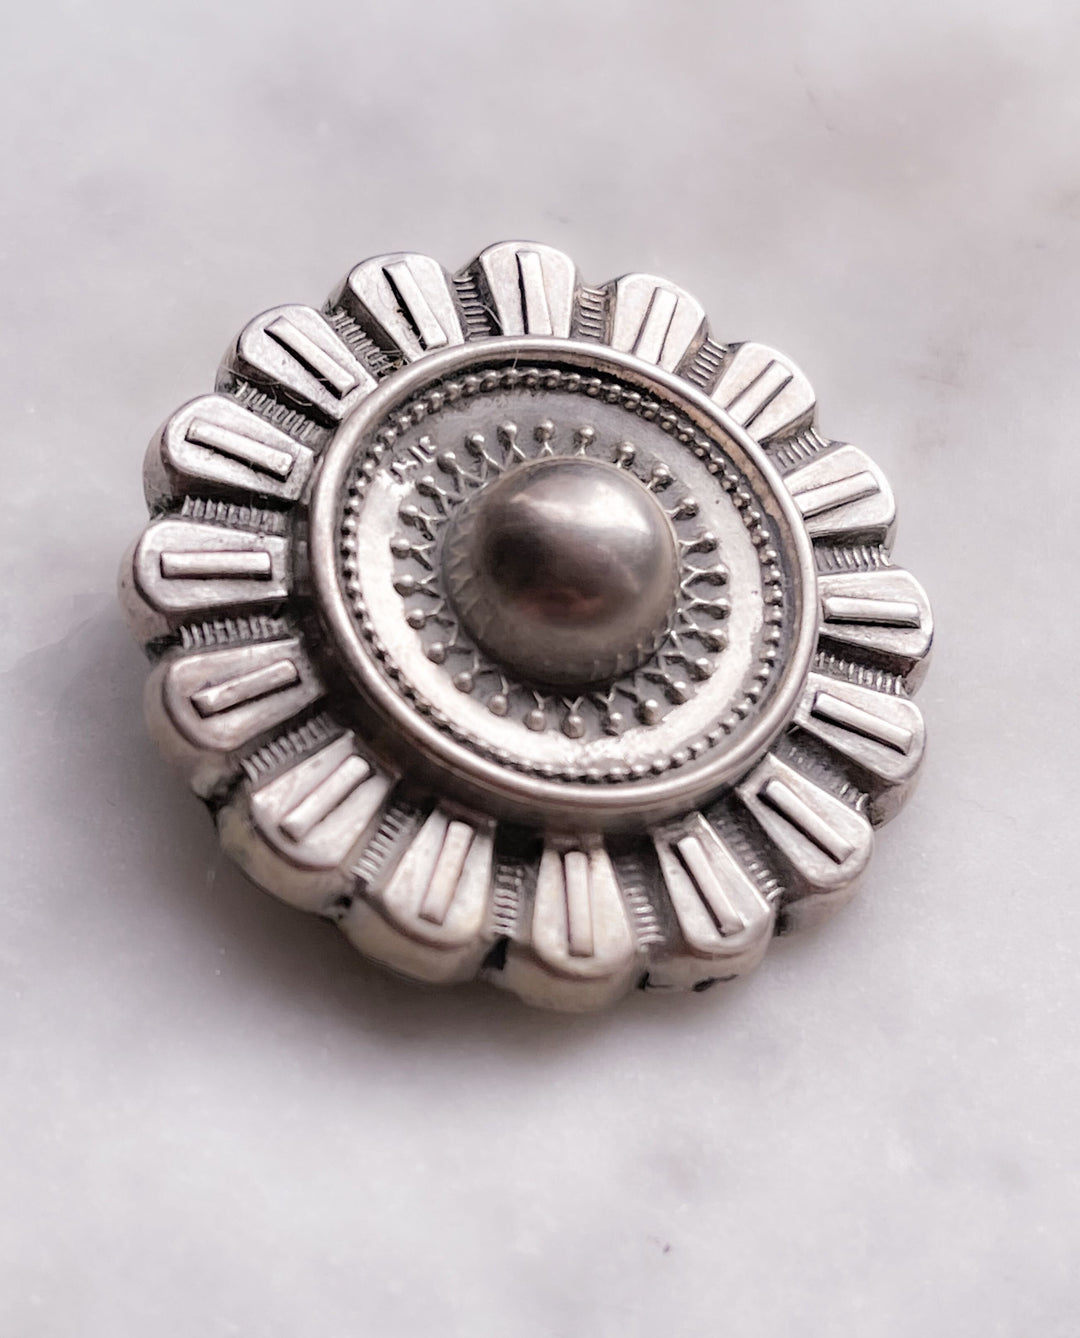 Delicious Etruscan Revival Brooch and Earring Set in Sterling Silver